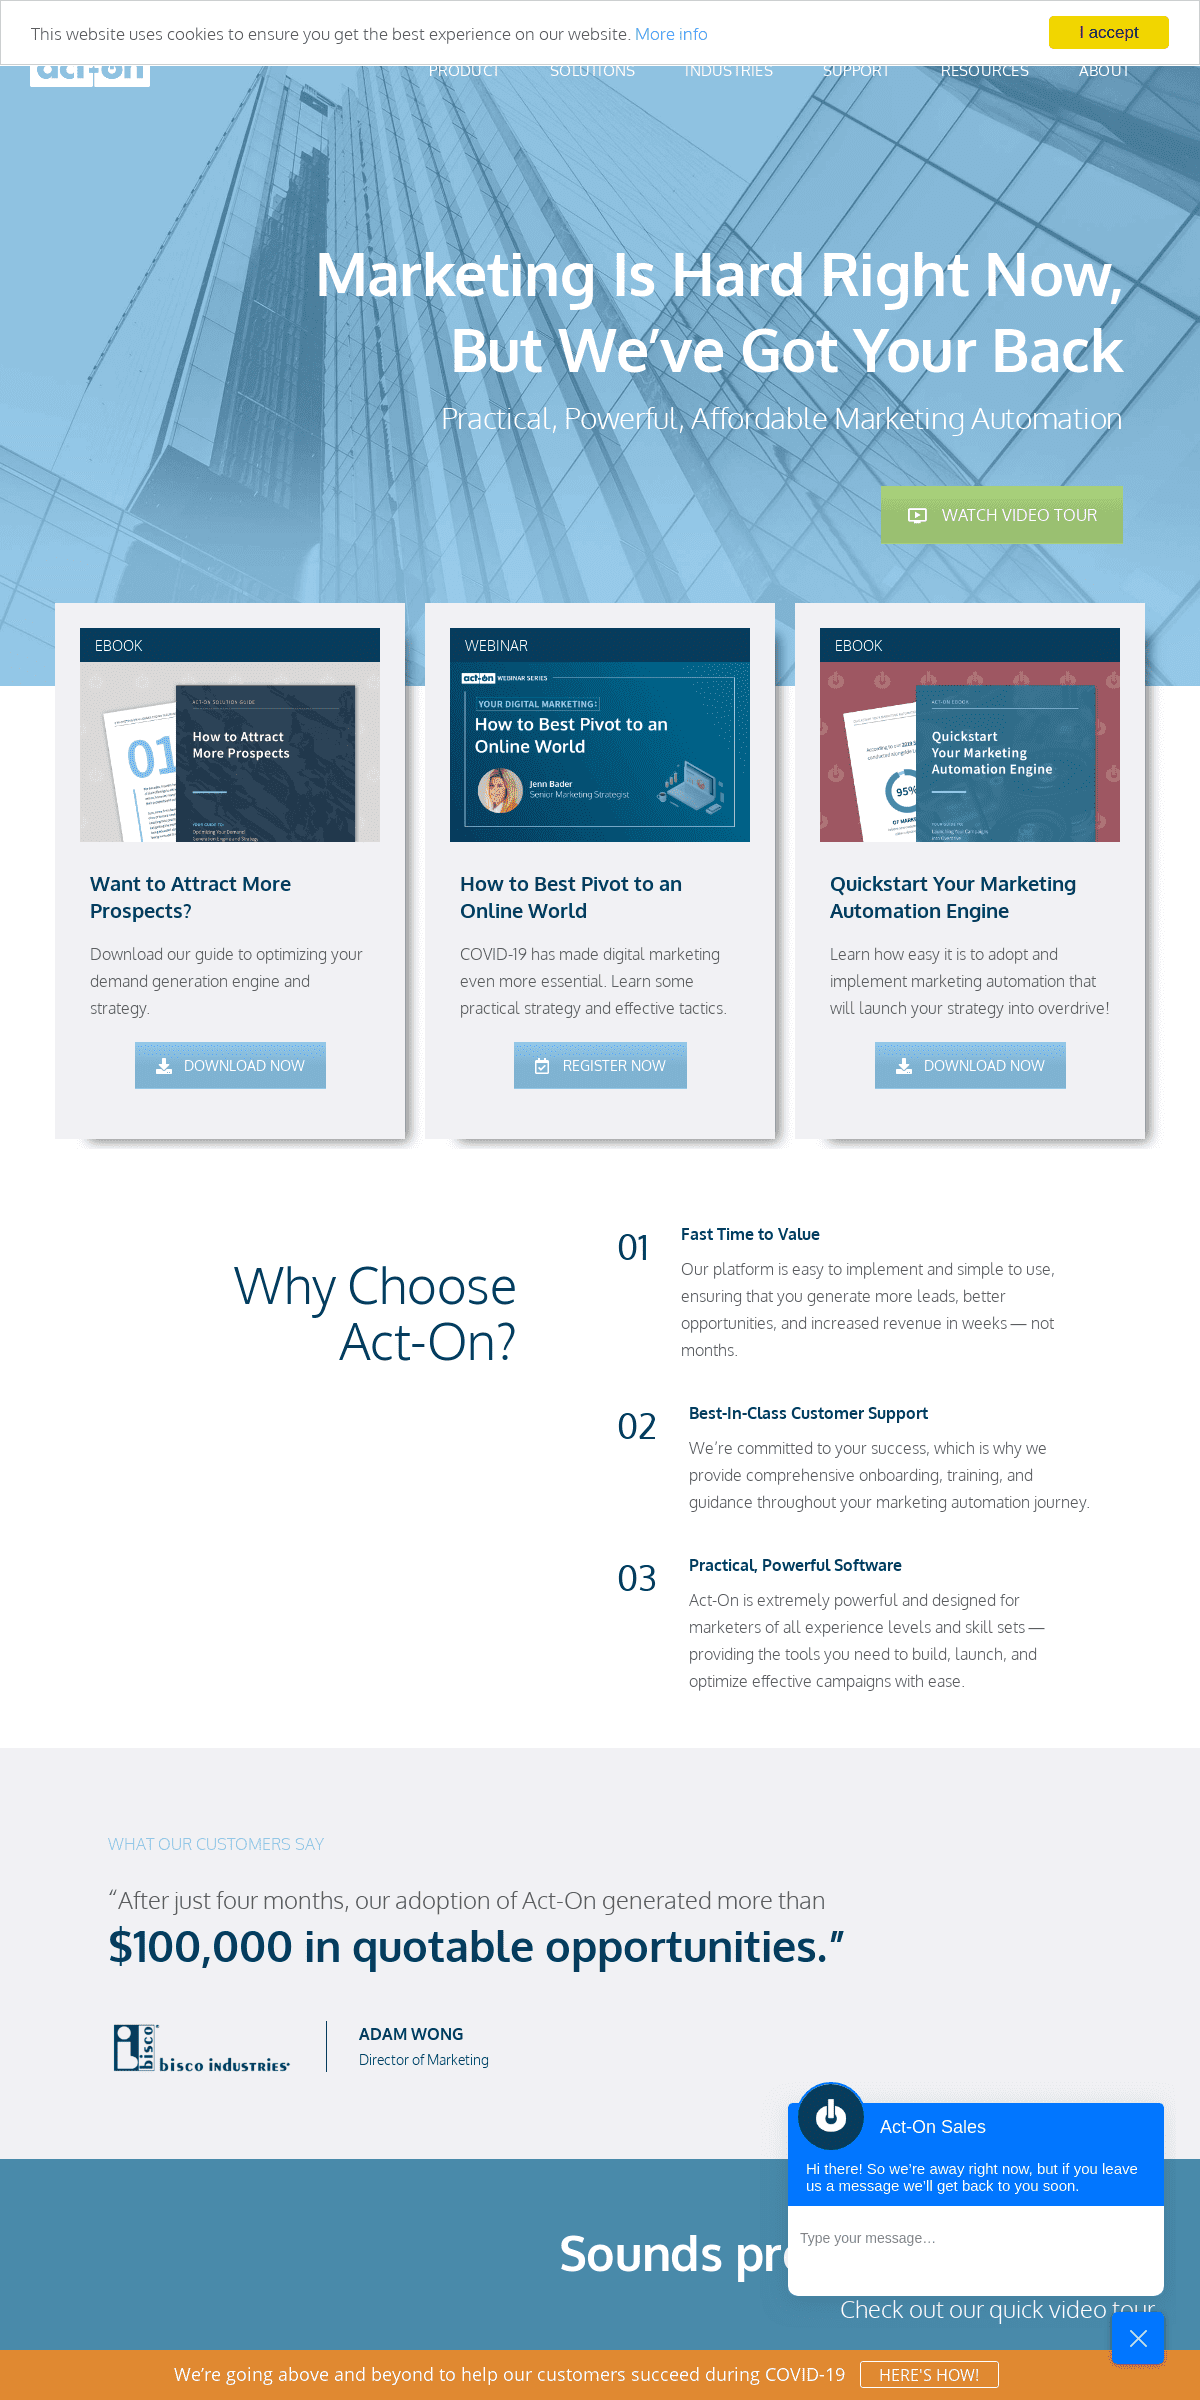 A complete backup of actonsoftware.com